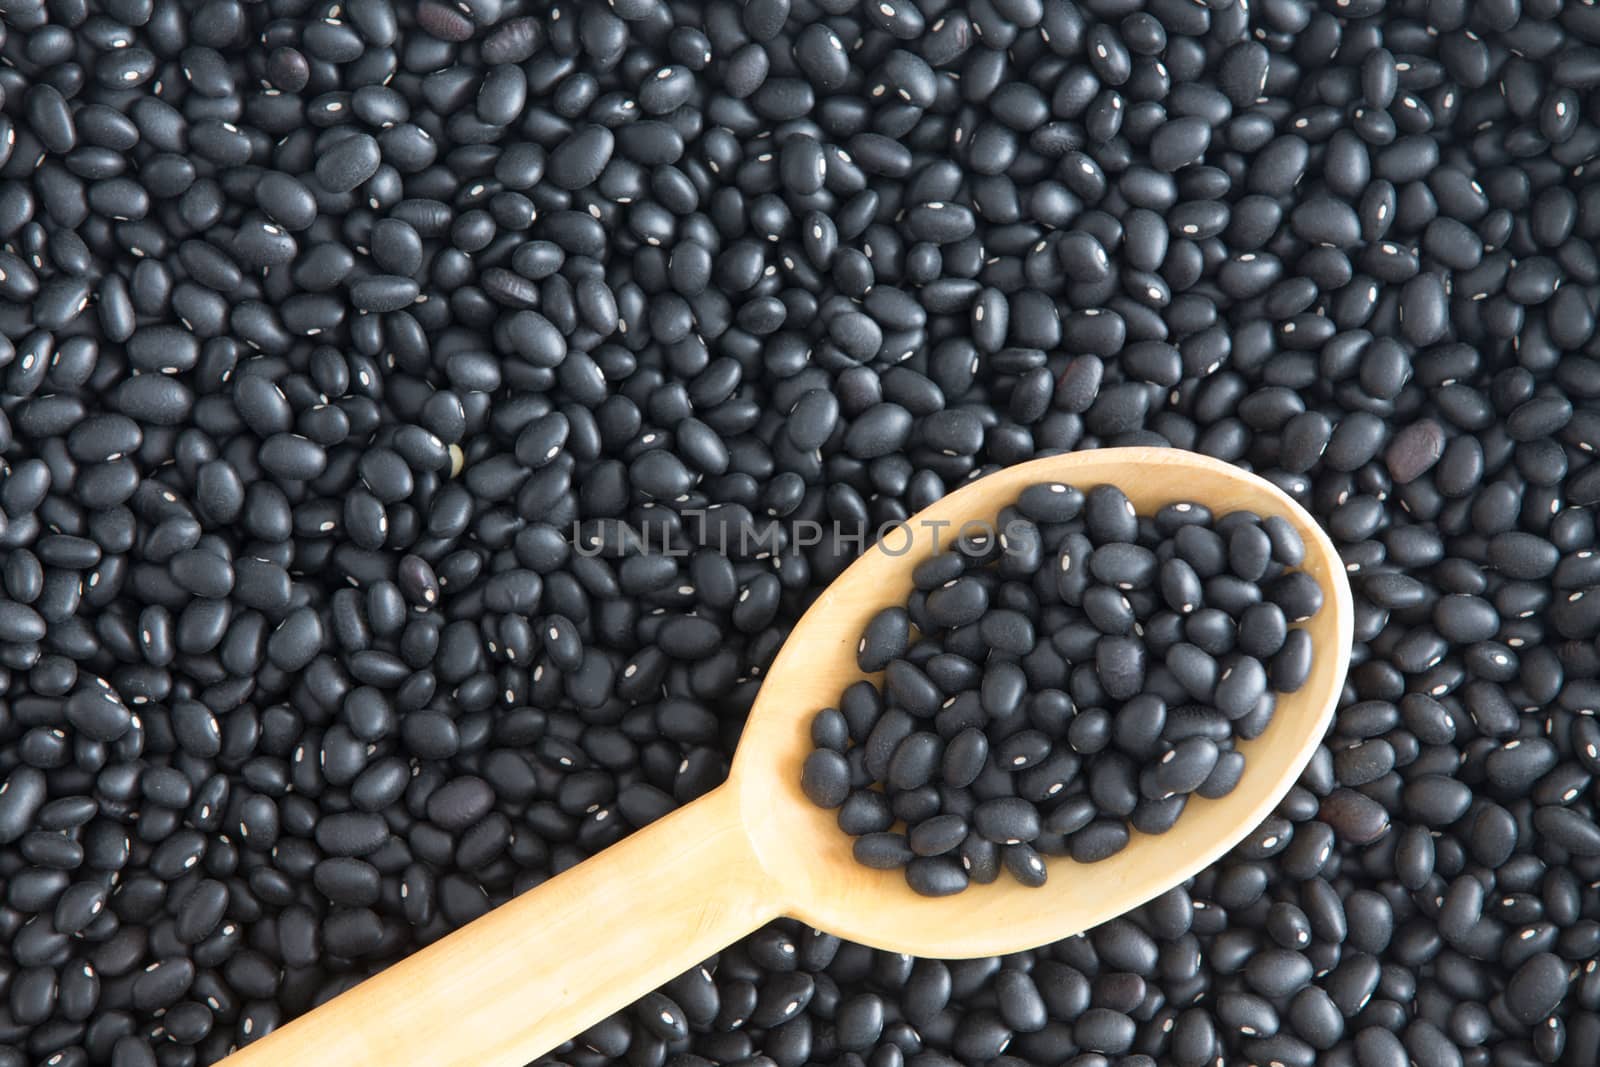 Bacground texture of healthy black beans, Phaseolus vulgaris, a variety of kidney bean with a rustic wooden kitchen spoon lying diagonally angled in the frame